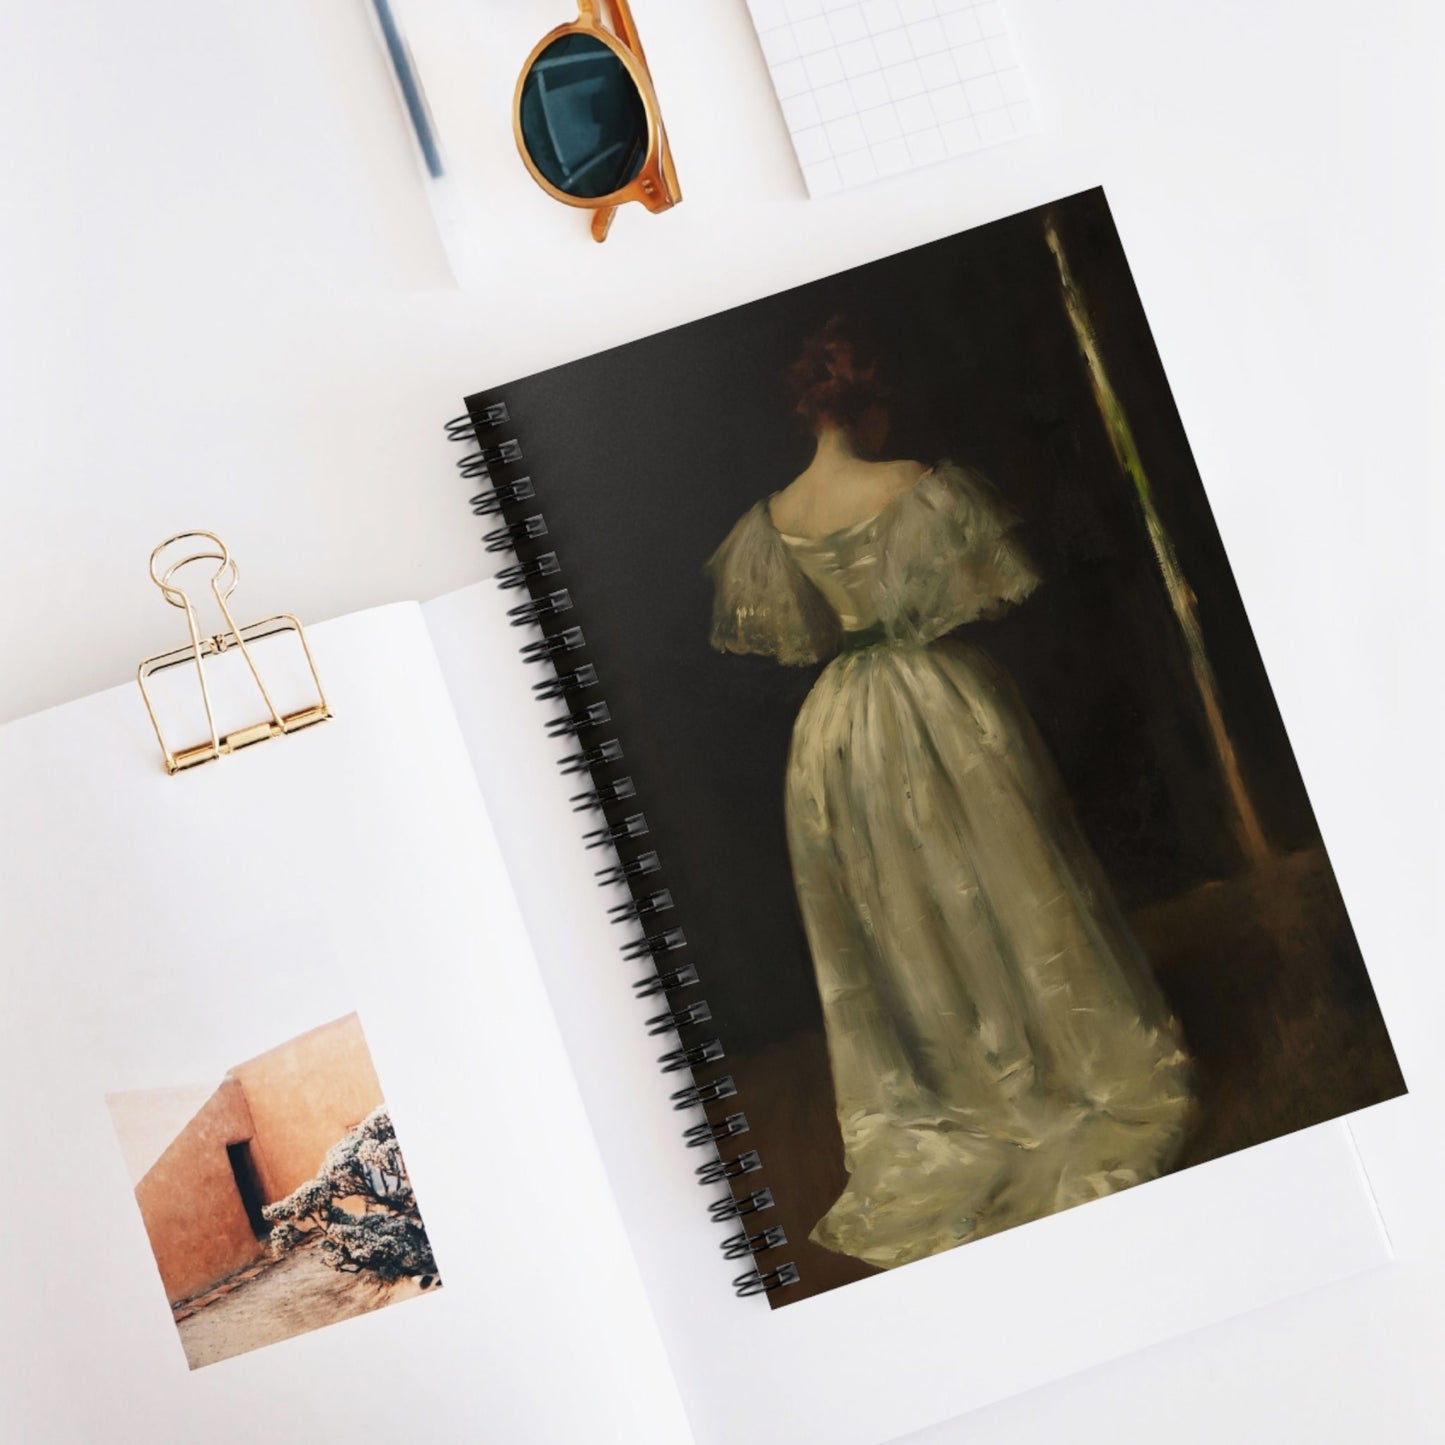 Woman in a White Dress Spiral Notebook Displayed on Desk